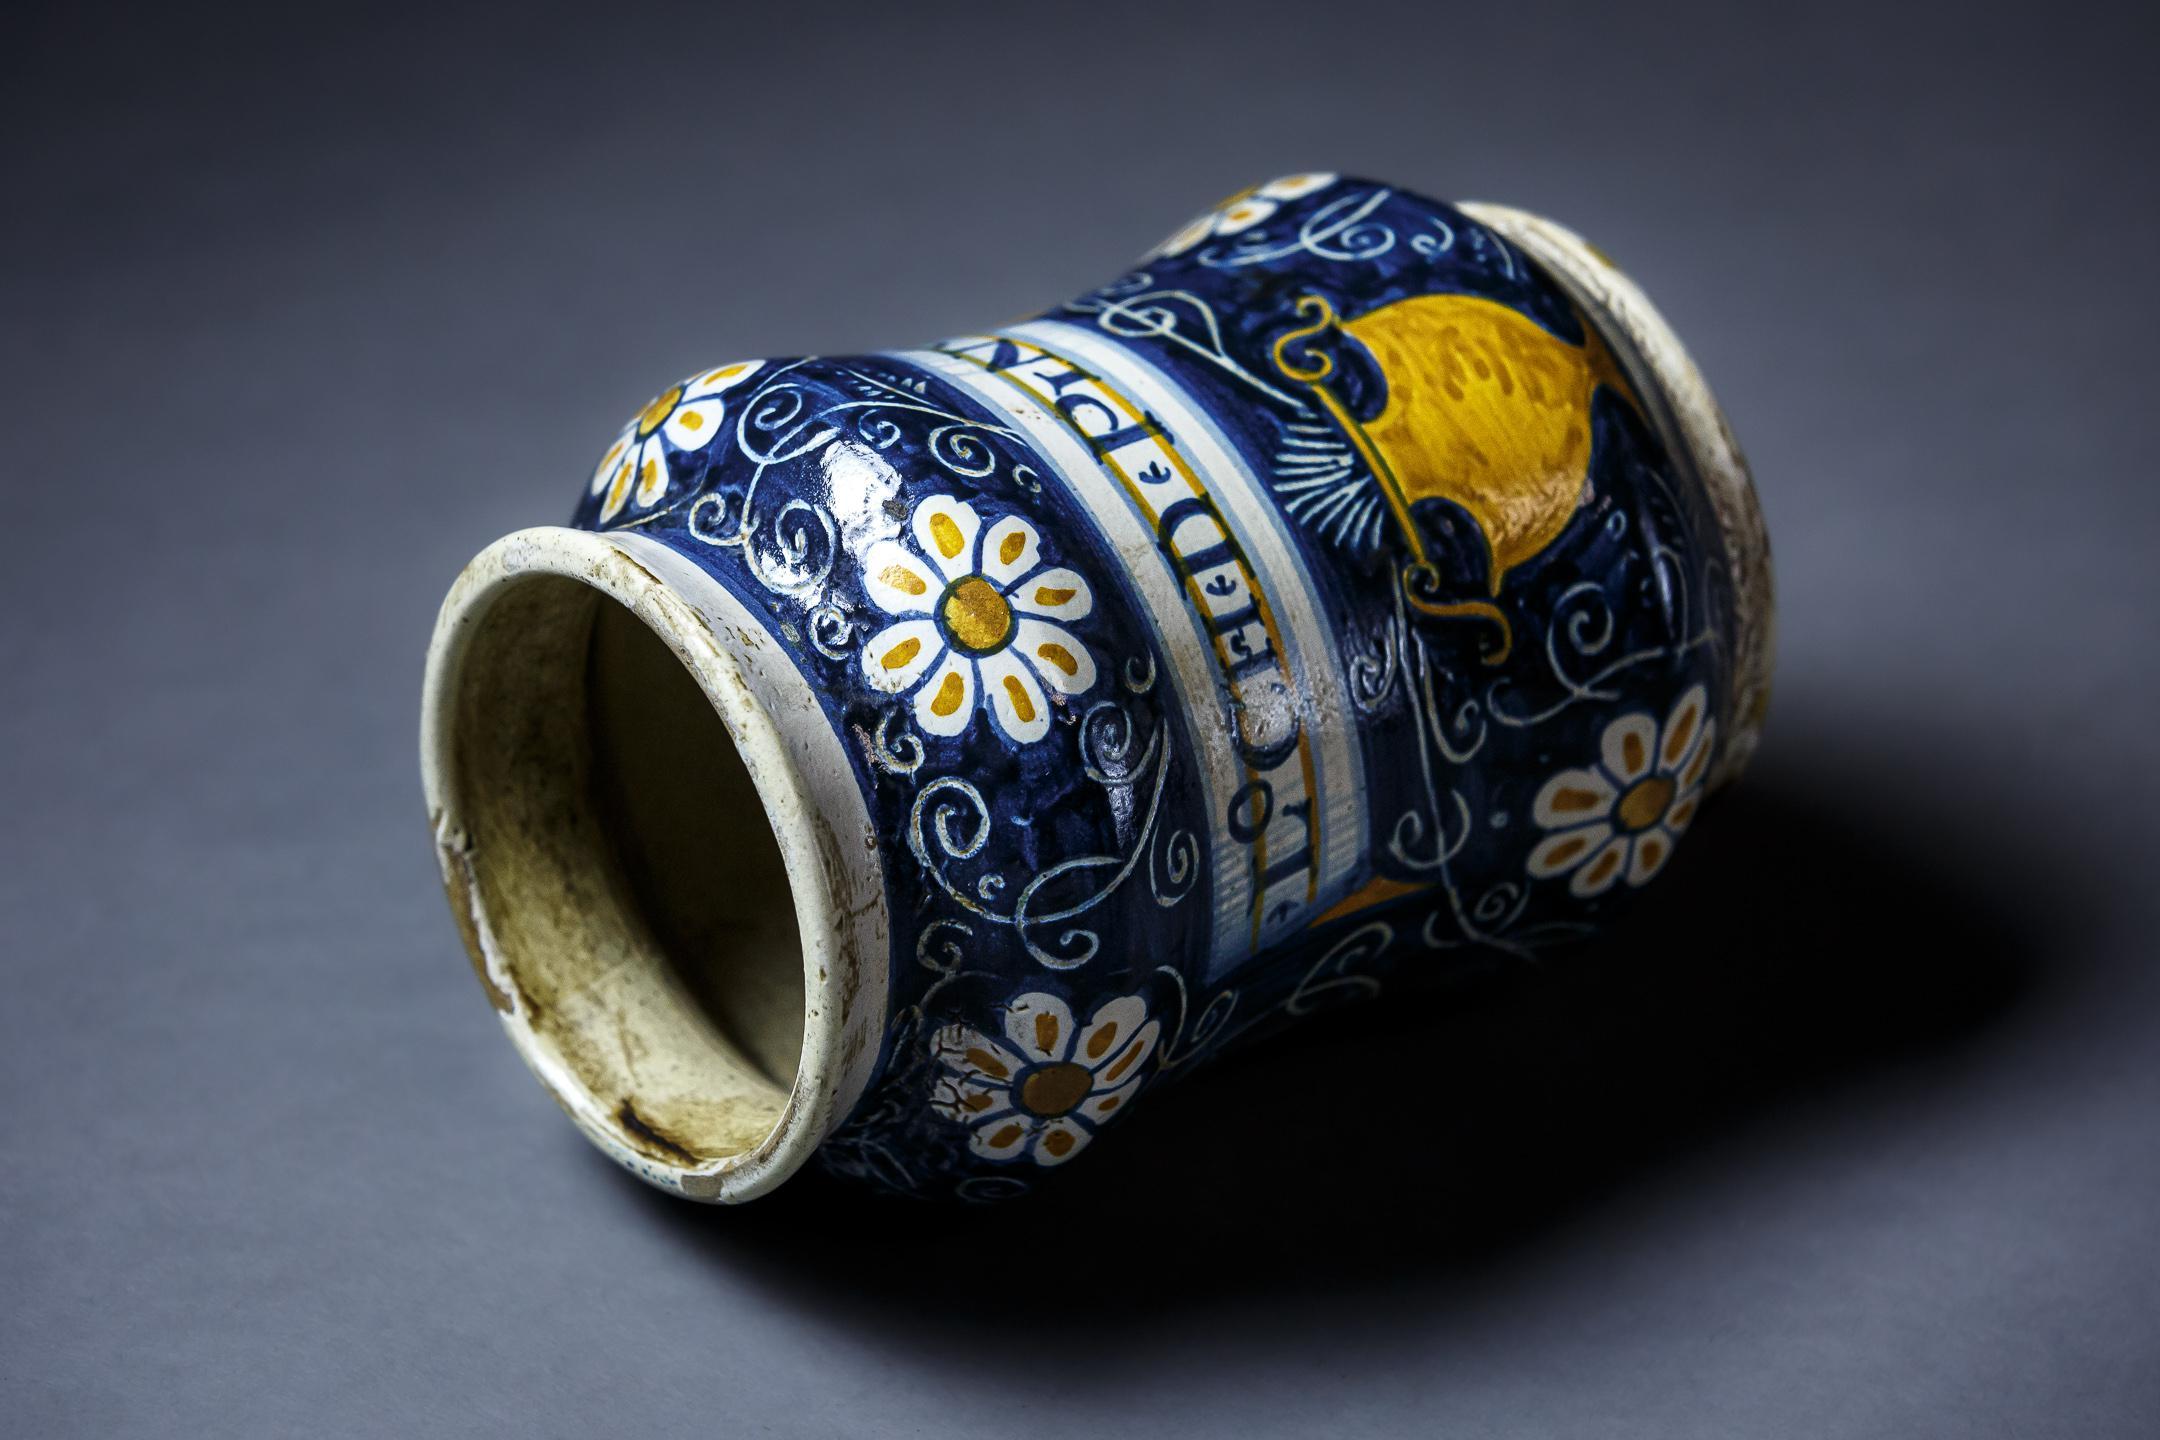 Early Maiolica tin glazed earthernware albarello or pharmacy jar. Painted in blue and yellow, apart from bands around the mouth and base the entire is decorated on blue ground with formal daisy like flowers on stems with tendrils springing from an